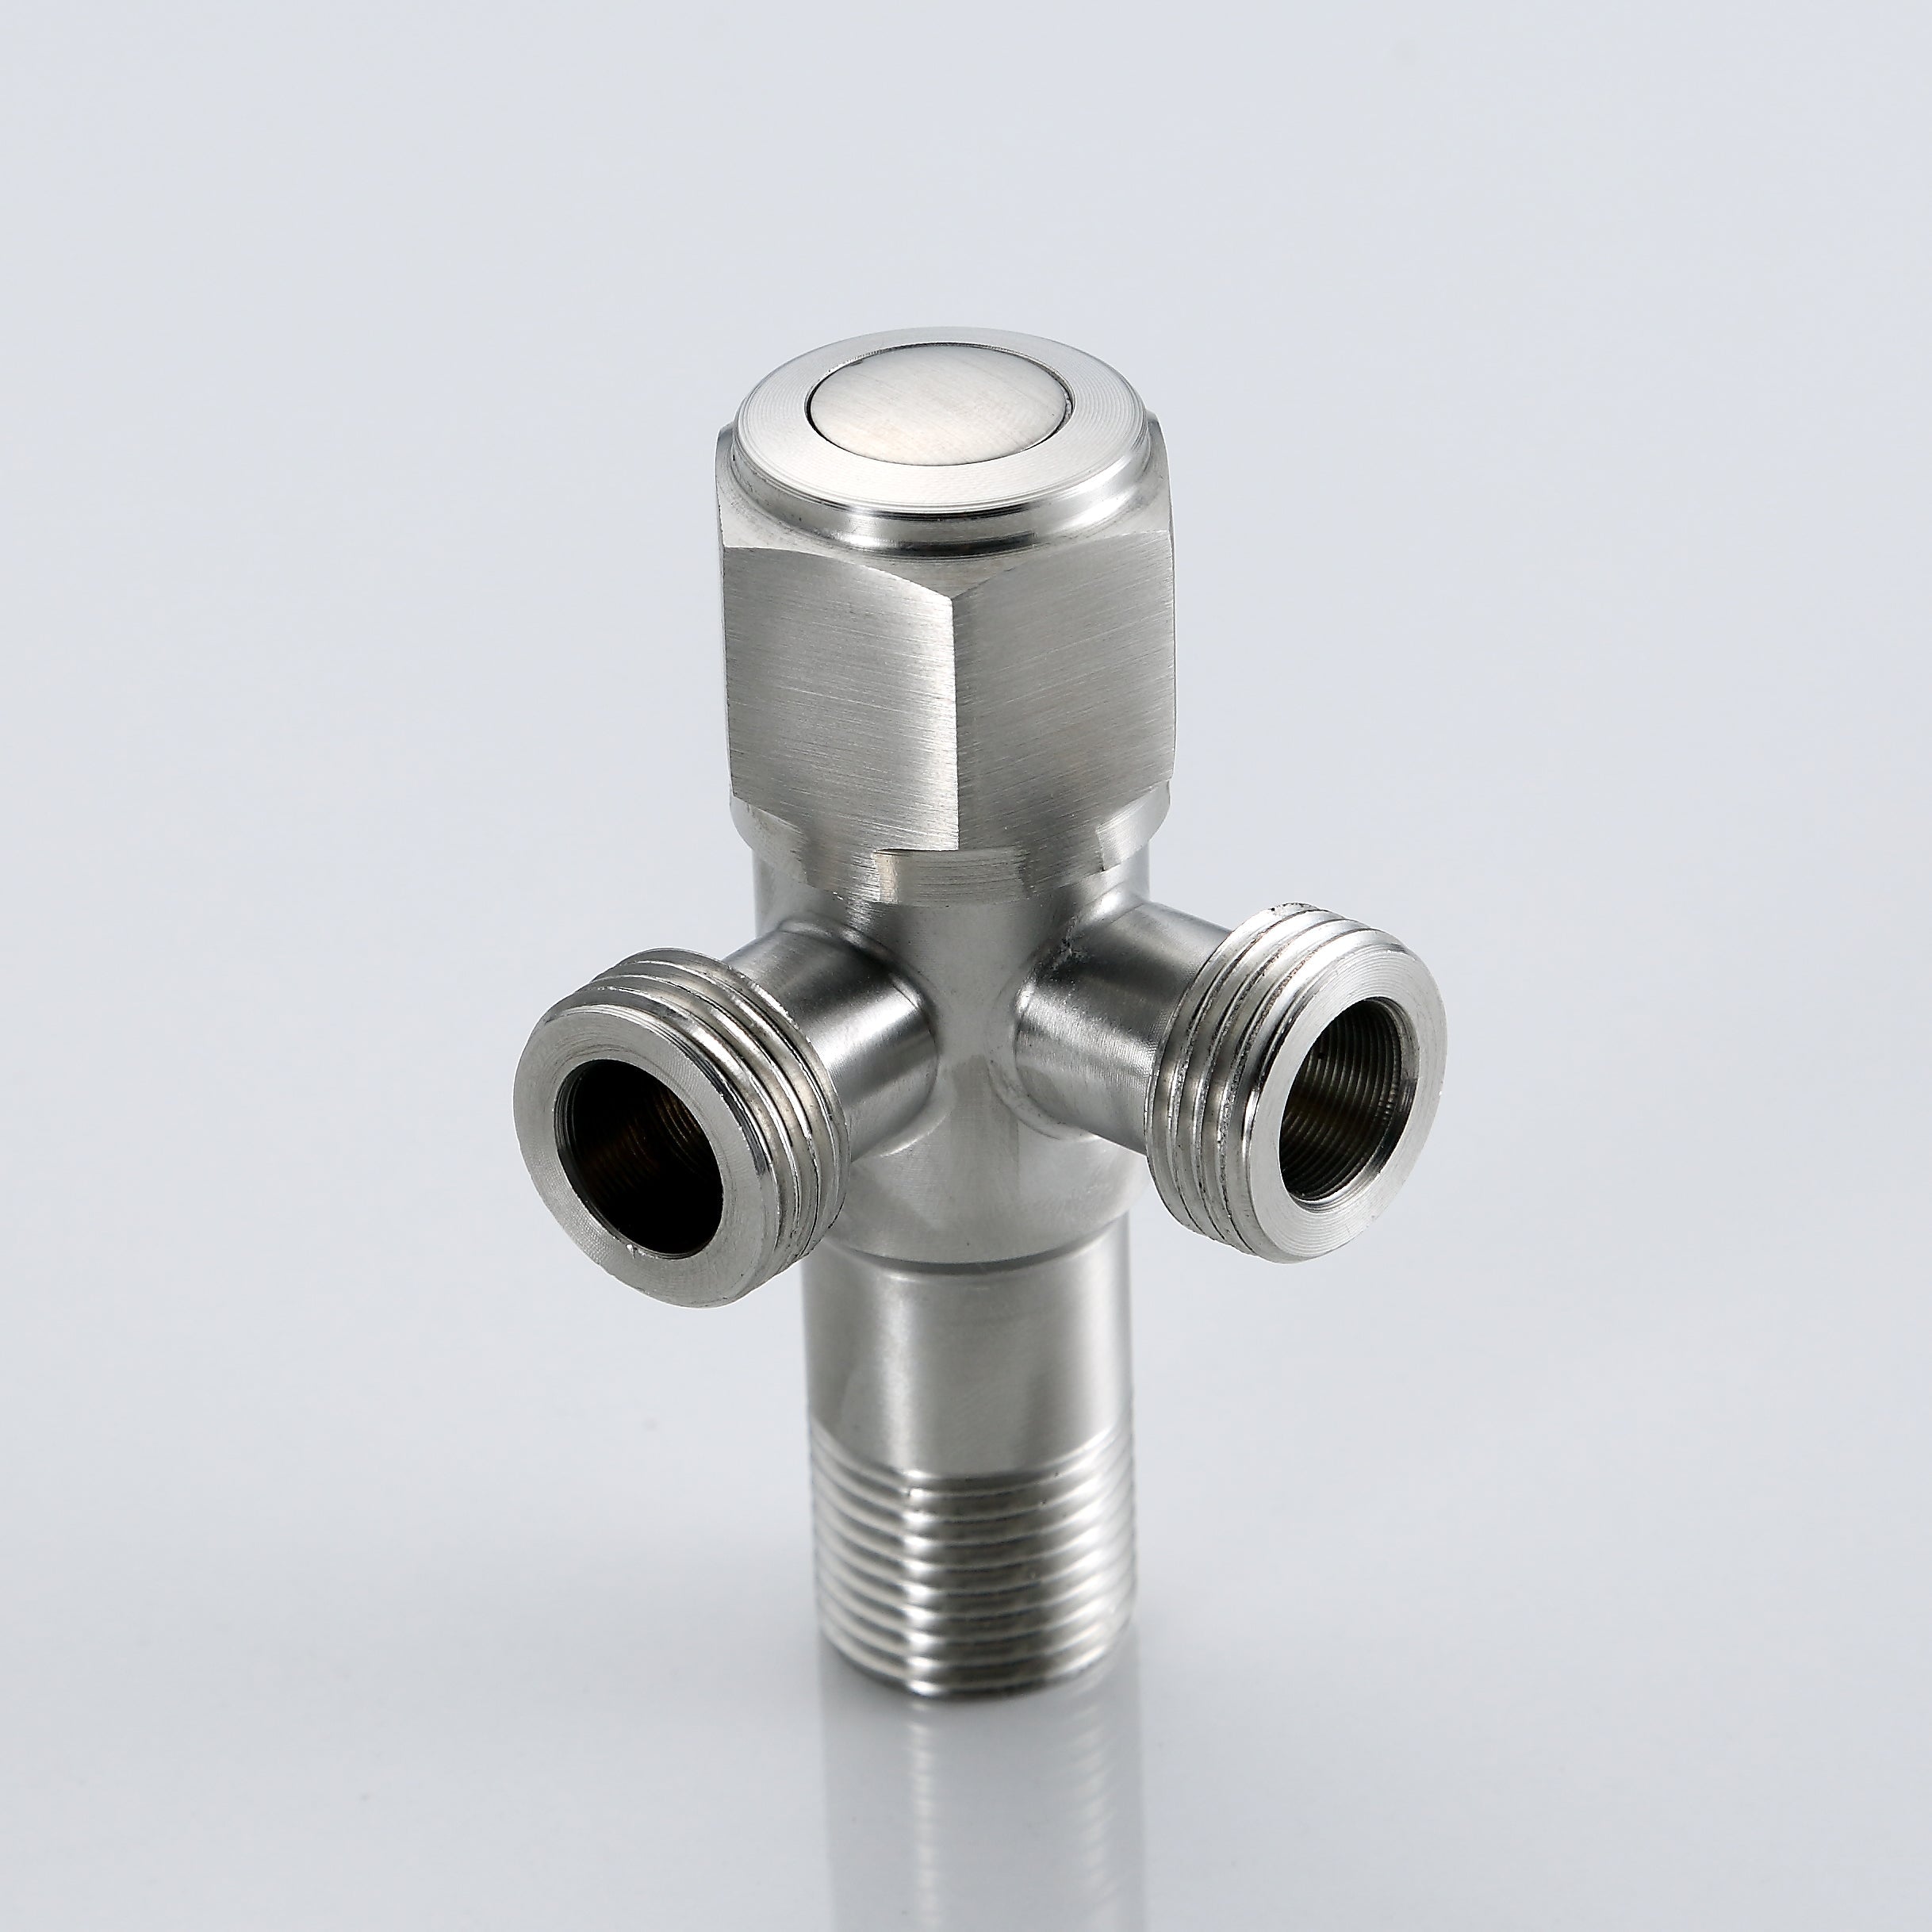 ANGLE VALVE 2-WAY M1/2" X M1/2" STAINLESS STEEL